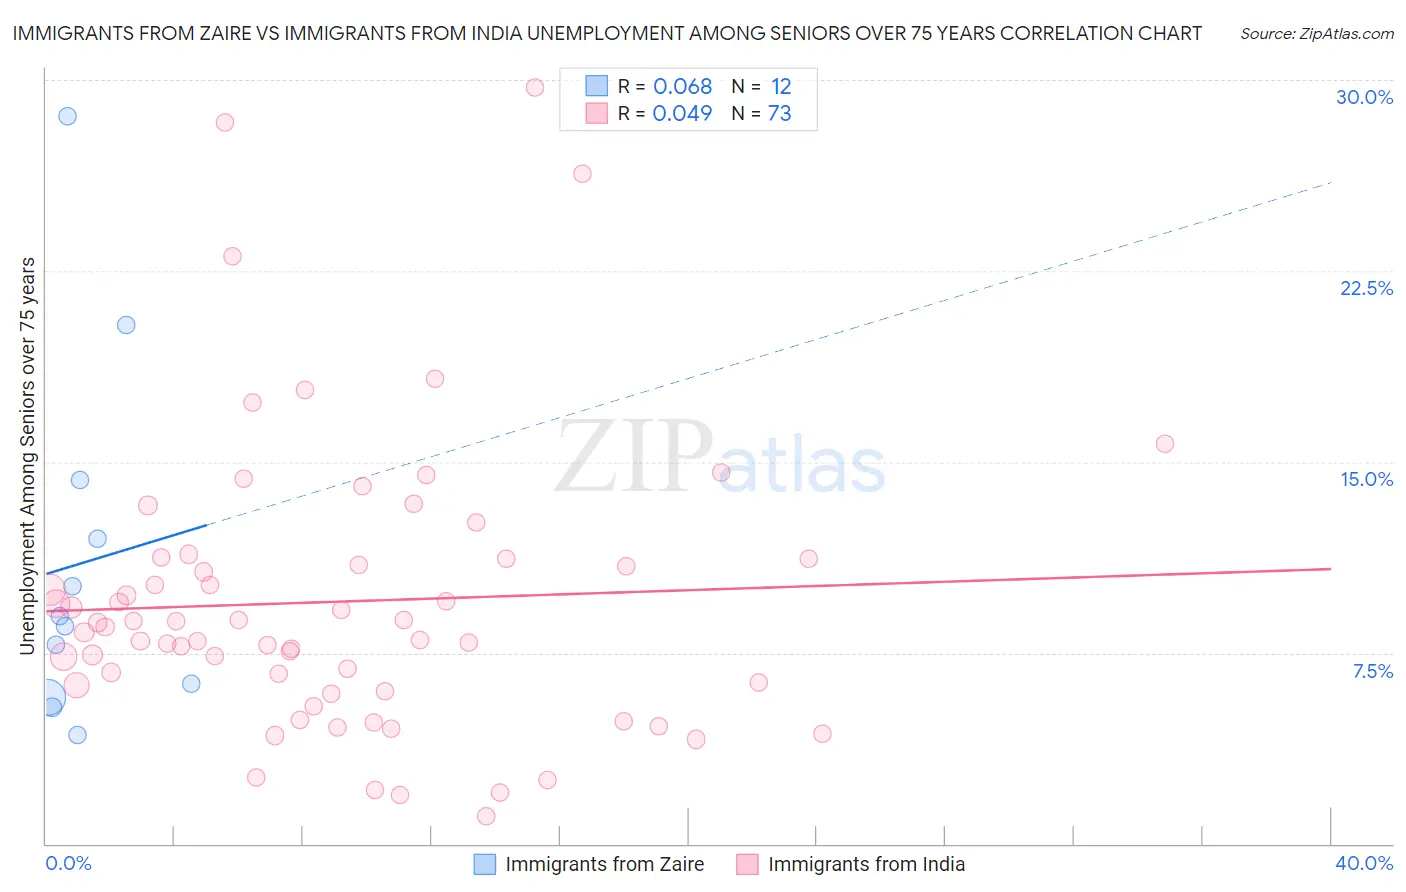 Immigrants from Zaire vs Immigrants from India Unemployment Among Seniors over 75 years